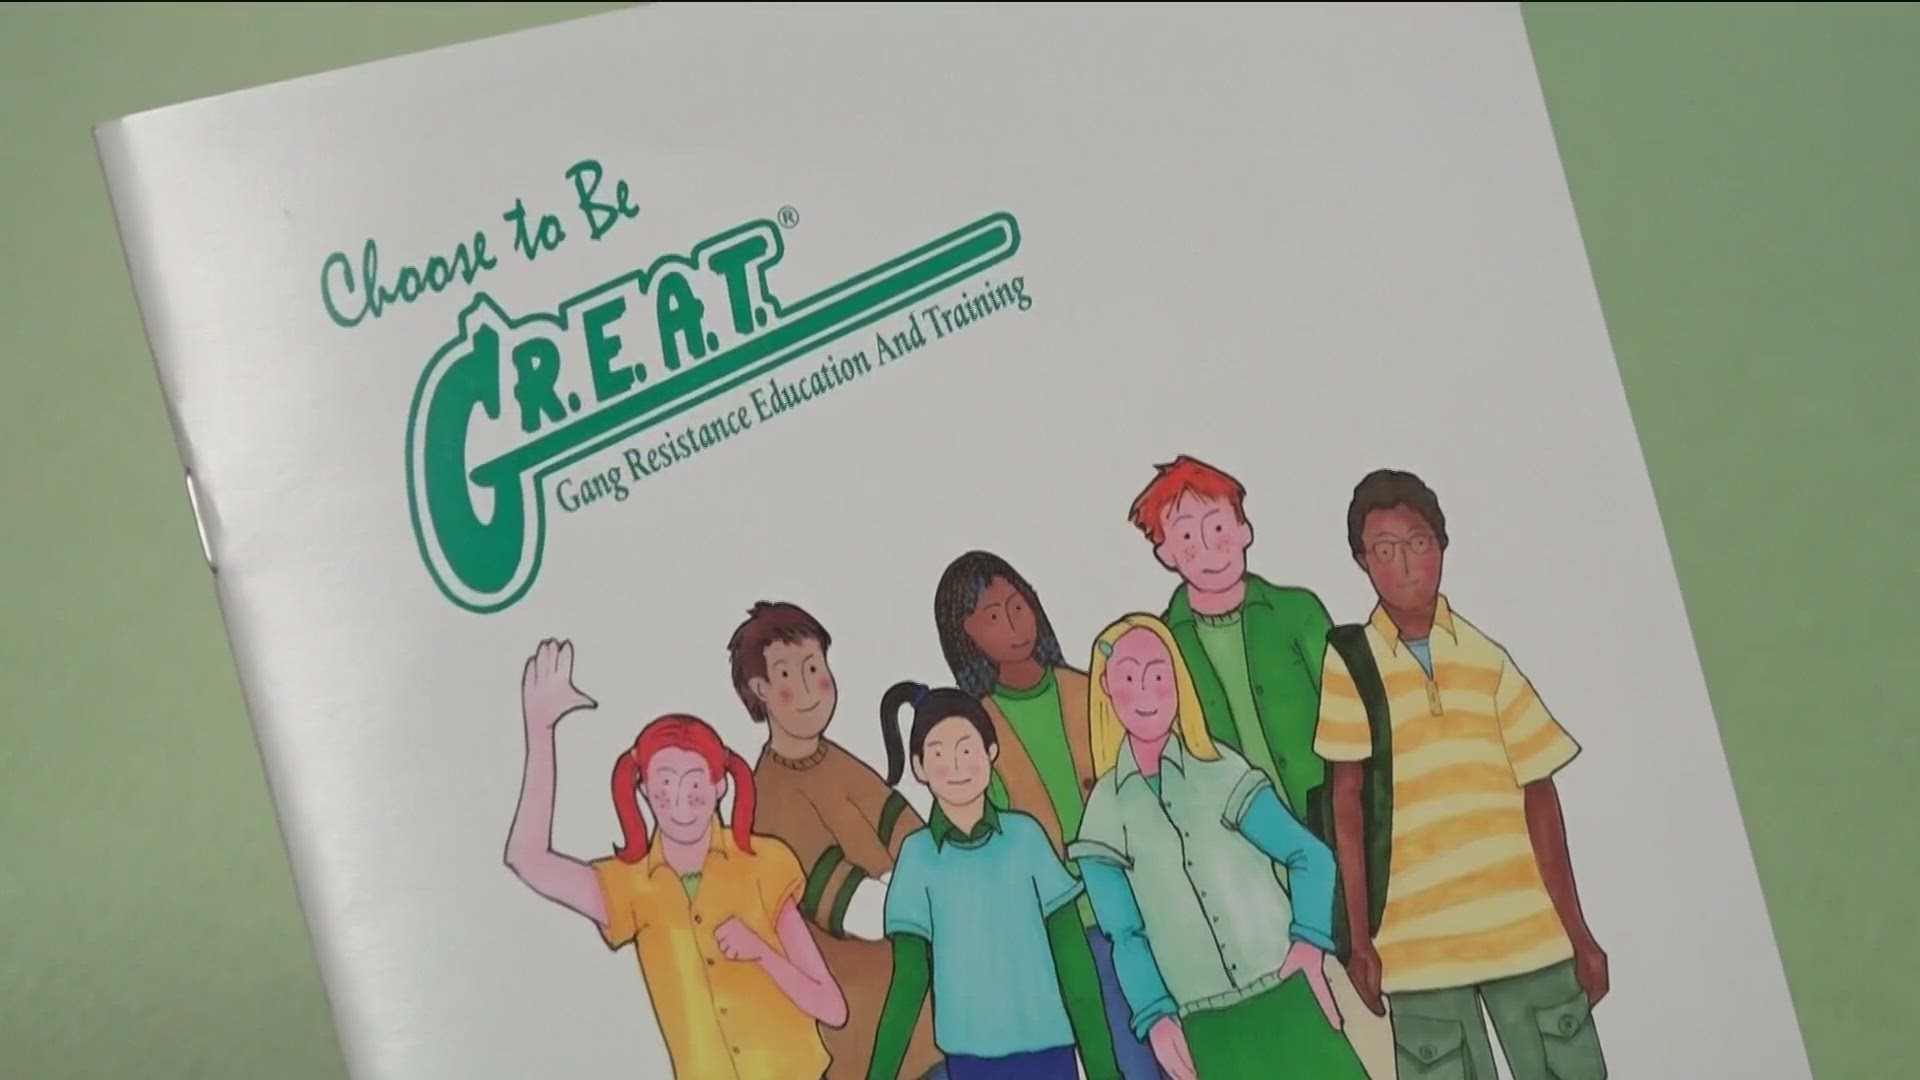 The G.R.E.A.T. program is used to teach children about violence.